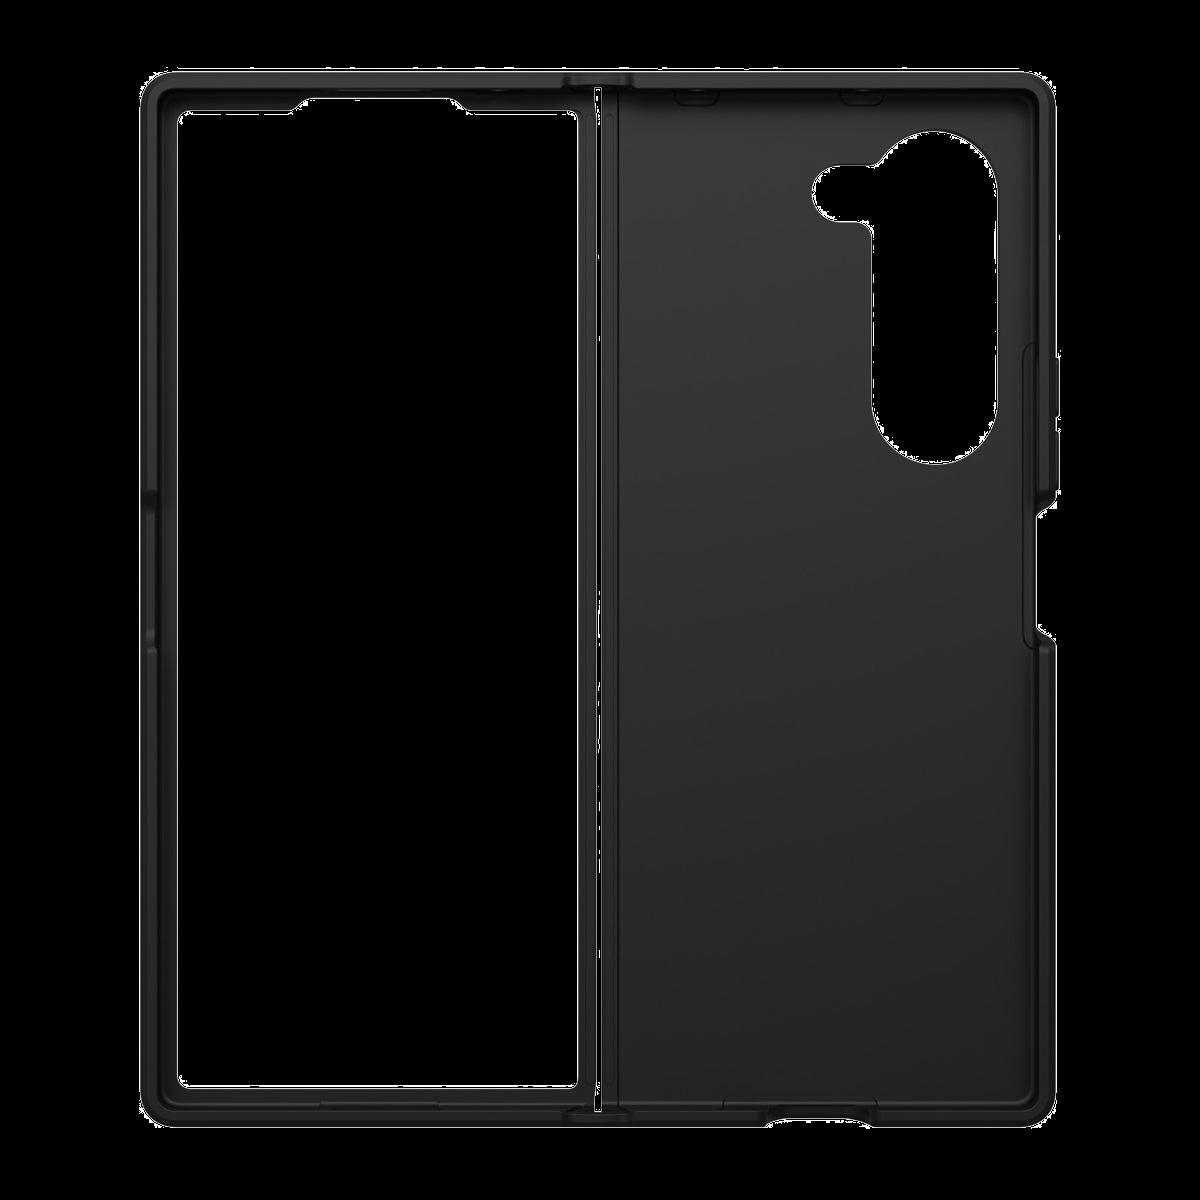 Designed for foldable phones, ZAGG’s Bridgetown case offers lightweight drop protection strengthened with Graphene, one of the strongest material on Earth.